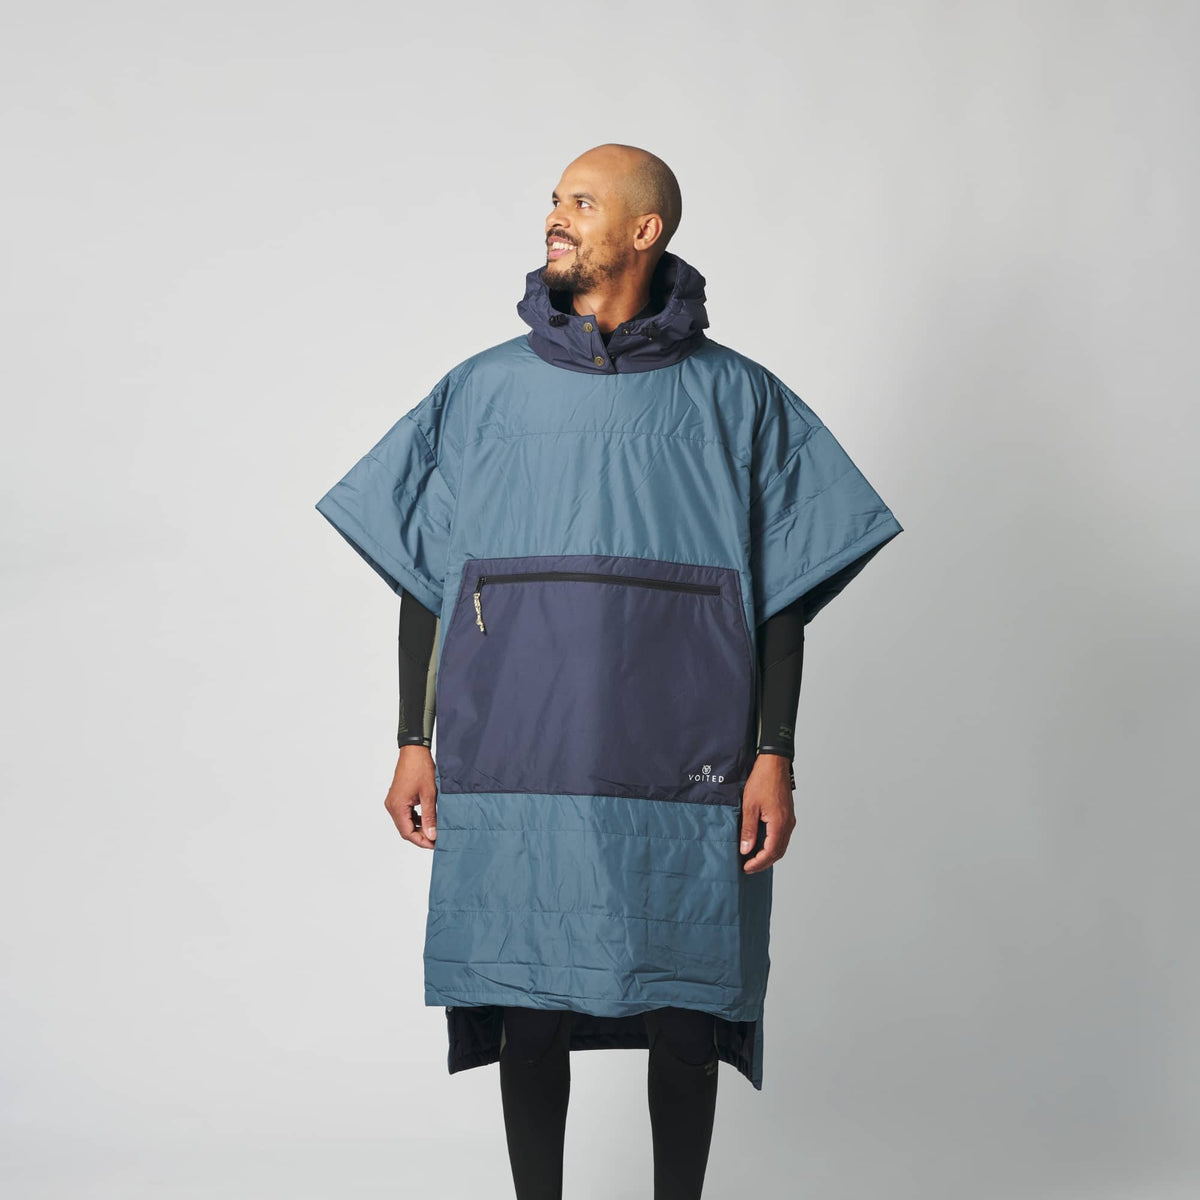 VOITED Outdoor Poncho for Surfing, Camping, Vanlife & Wild Swimming - Marsh Grey / Graphite